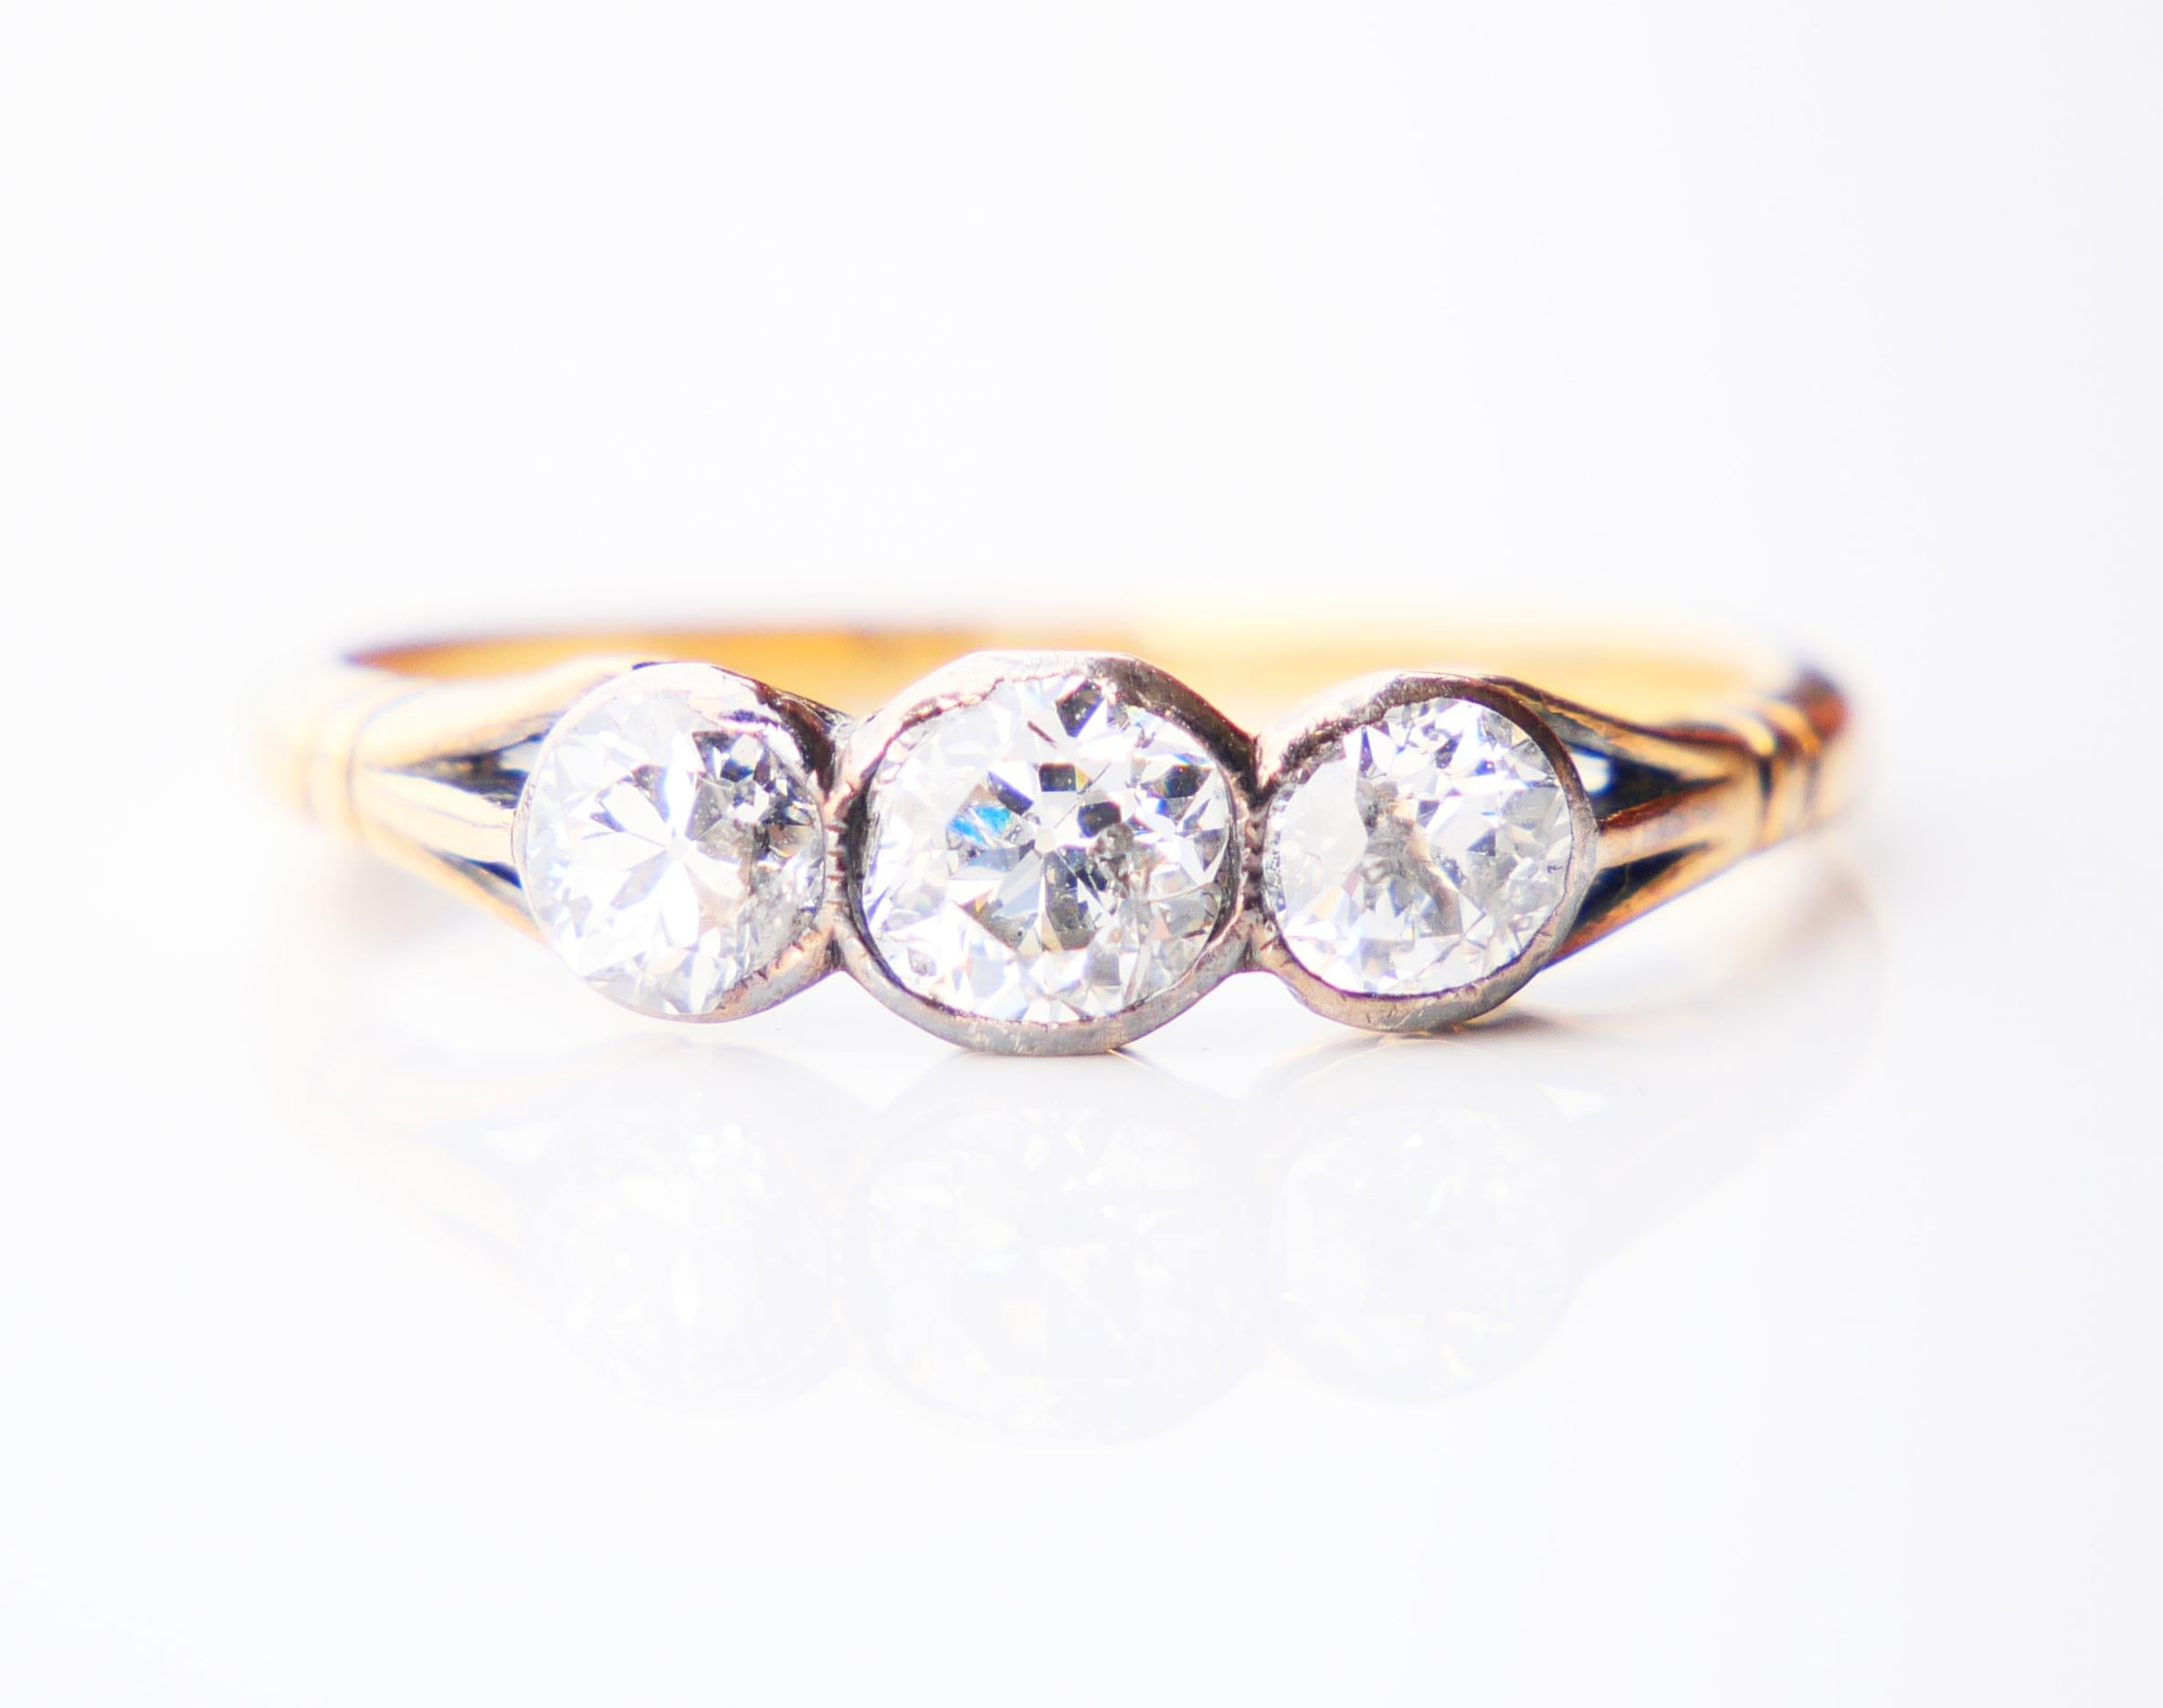 Old Ring with 3 old European cut Diamonds, band in solid 18K Yellow Gold (tested) with Silver clusters.

No hallmarks made ca. 1900s -1920s

Largest central oval cut Diamond 5 mm x 4 mm x 3 / 0.5 ct; two others Ø 4 mm x 2.8mm deep / 0.3 ct each.